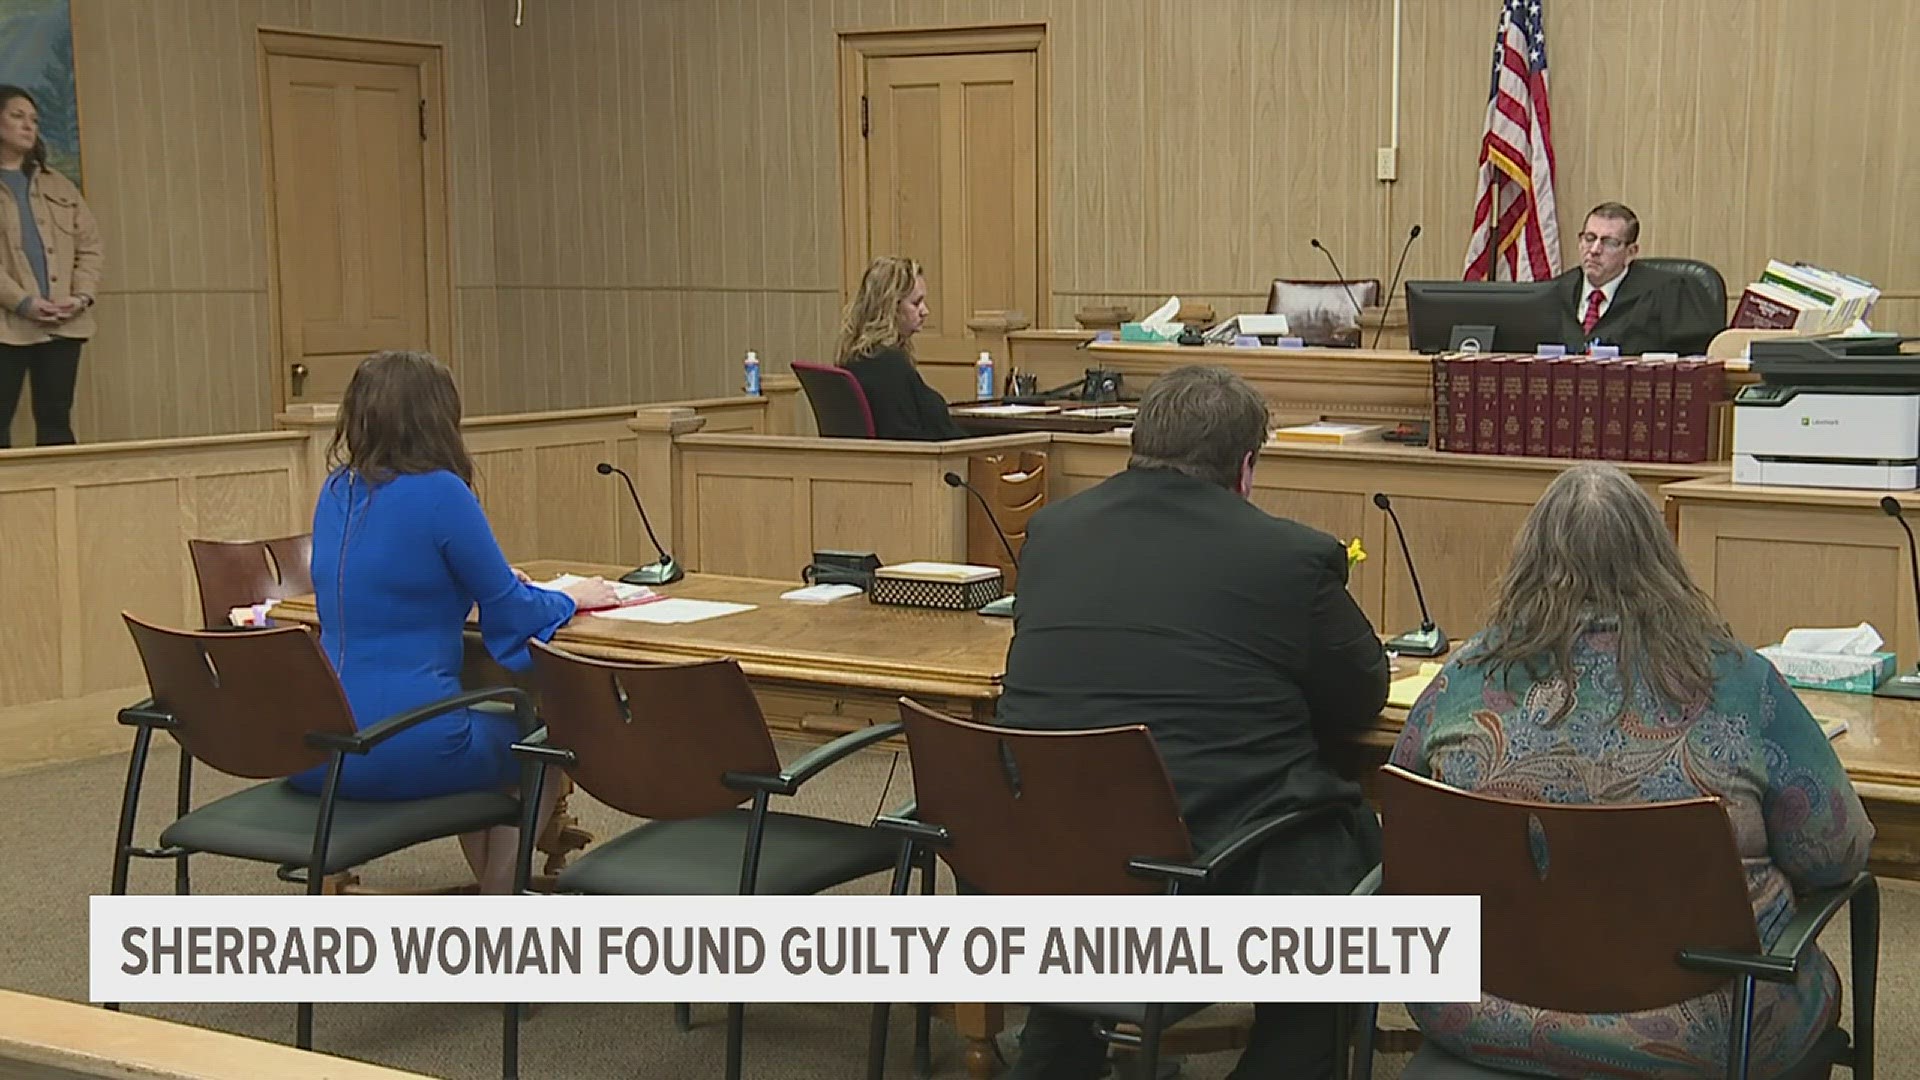 Karen Plambeck of Sherrard was found guilty on 10 charges of aggravated cruelty to animals.